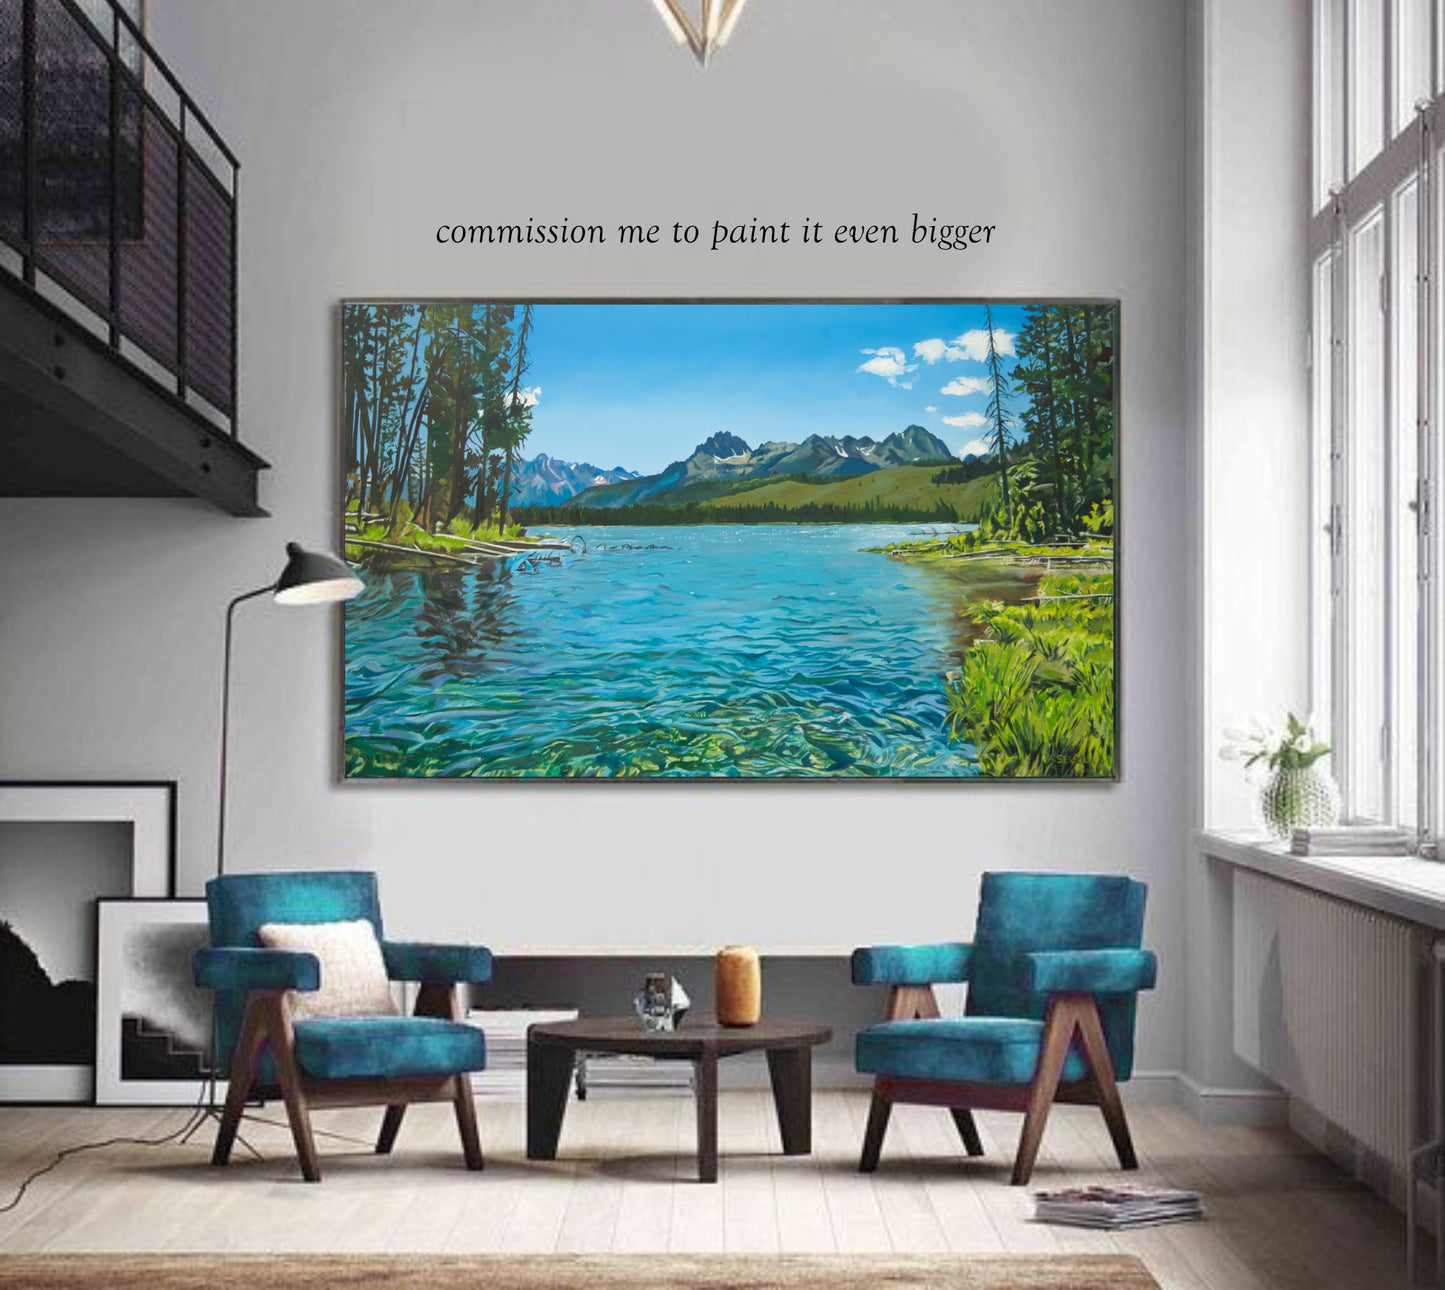 "Redfish Summer Clear" - Fine art Paper or Canvas, Giclée reprod. of oil painting of Idaho's Redfish Lake area in the Sawtooth Mountains